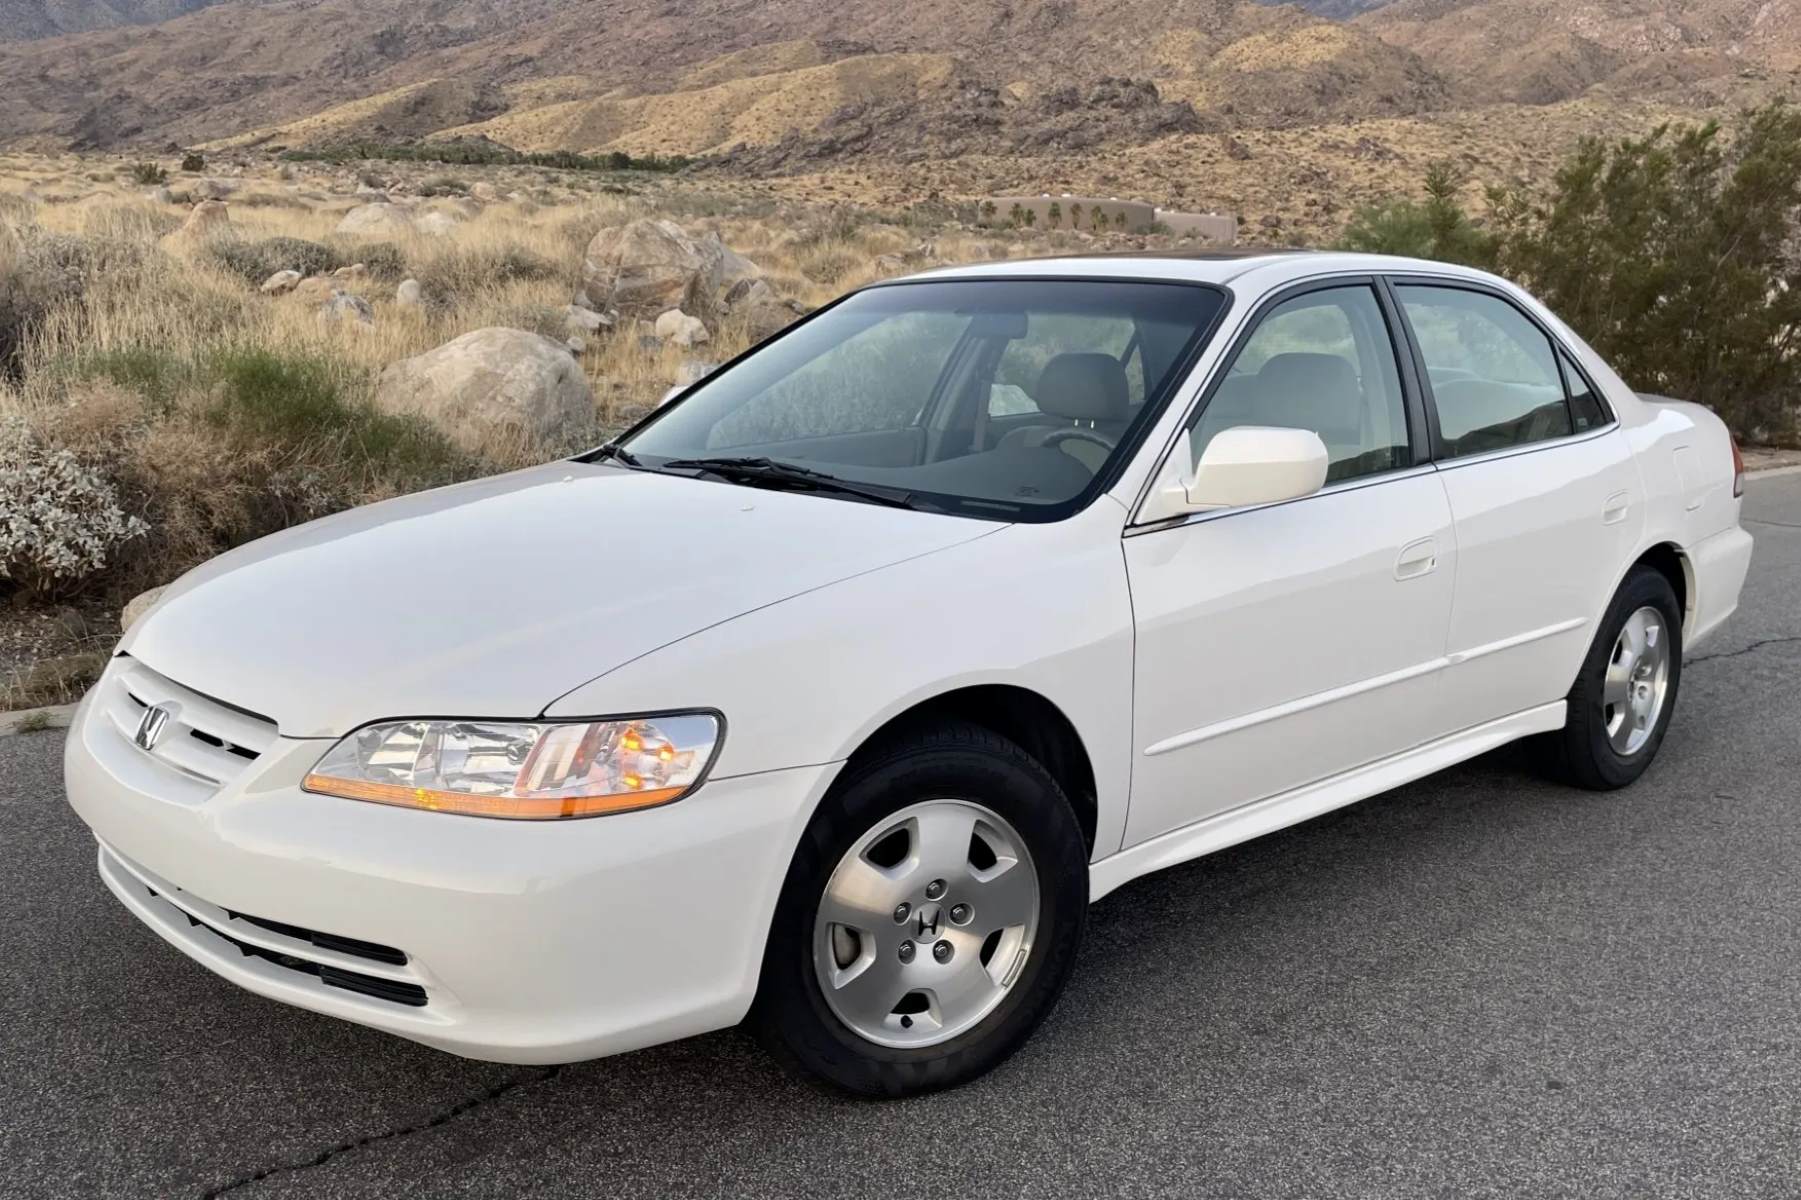 You Won’t Believe How Amazing The Honda Accord 2001 Model Is!